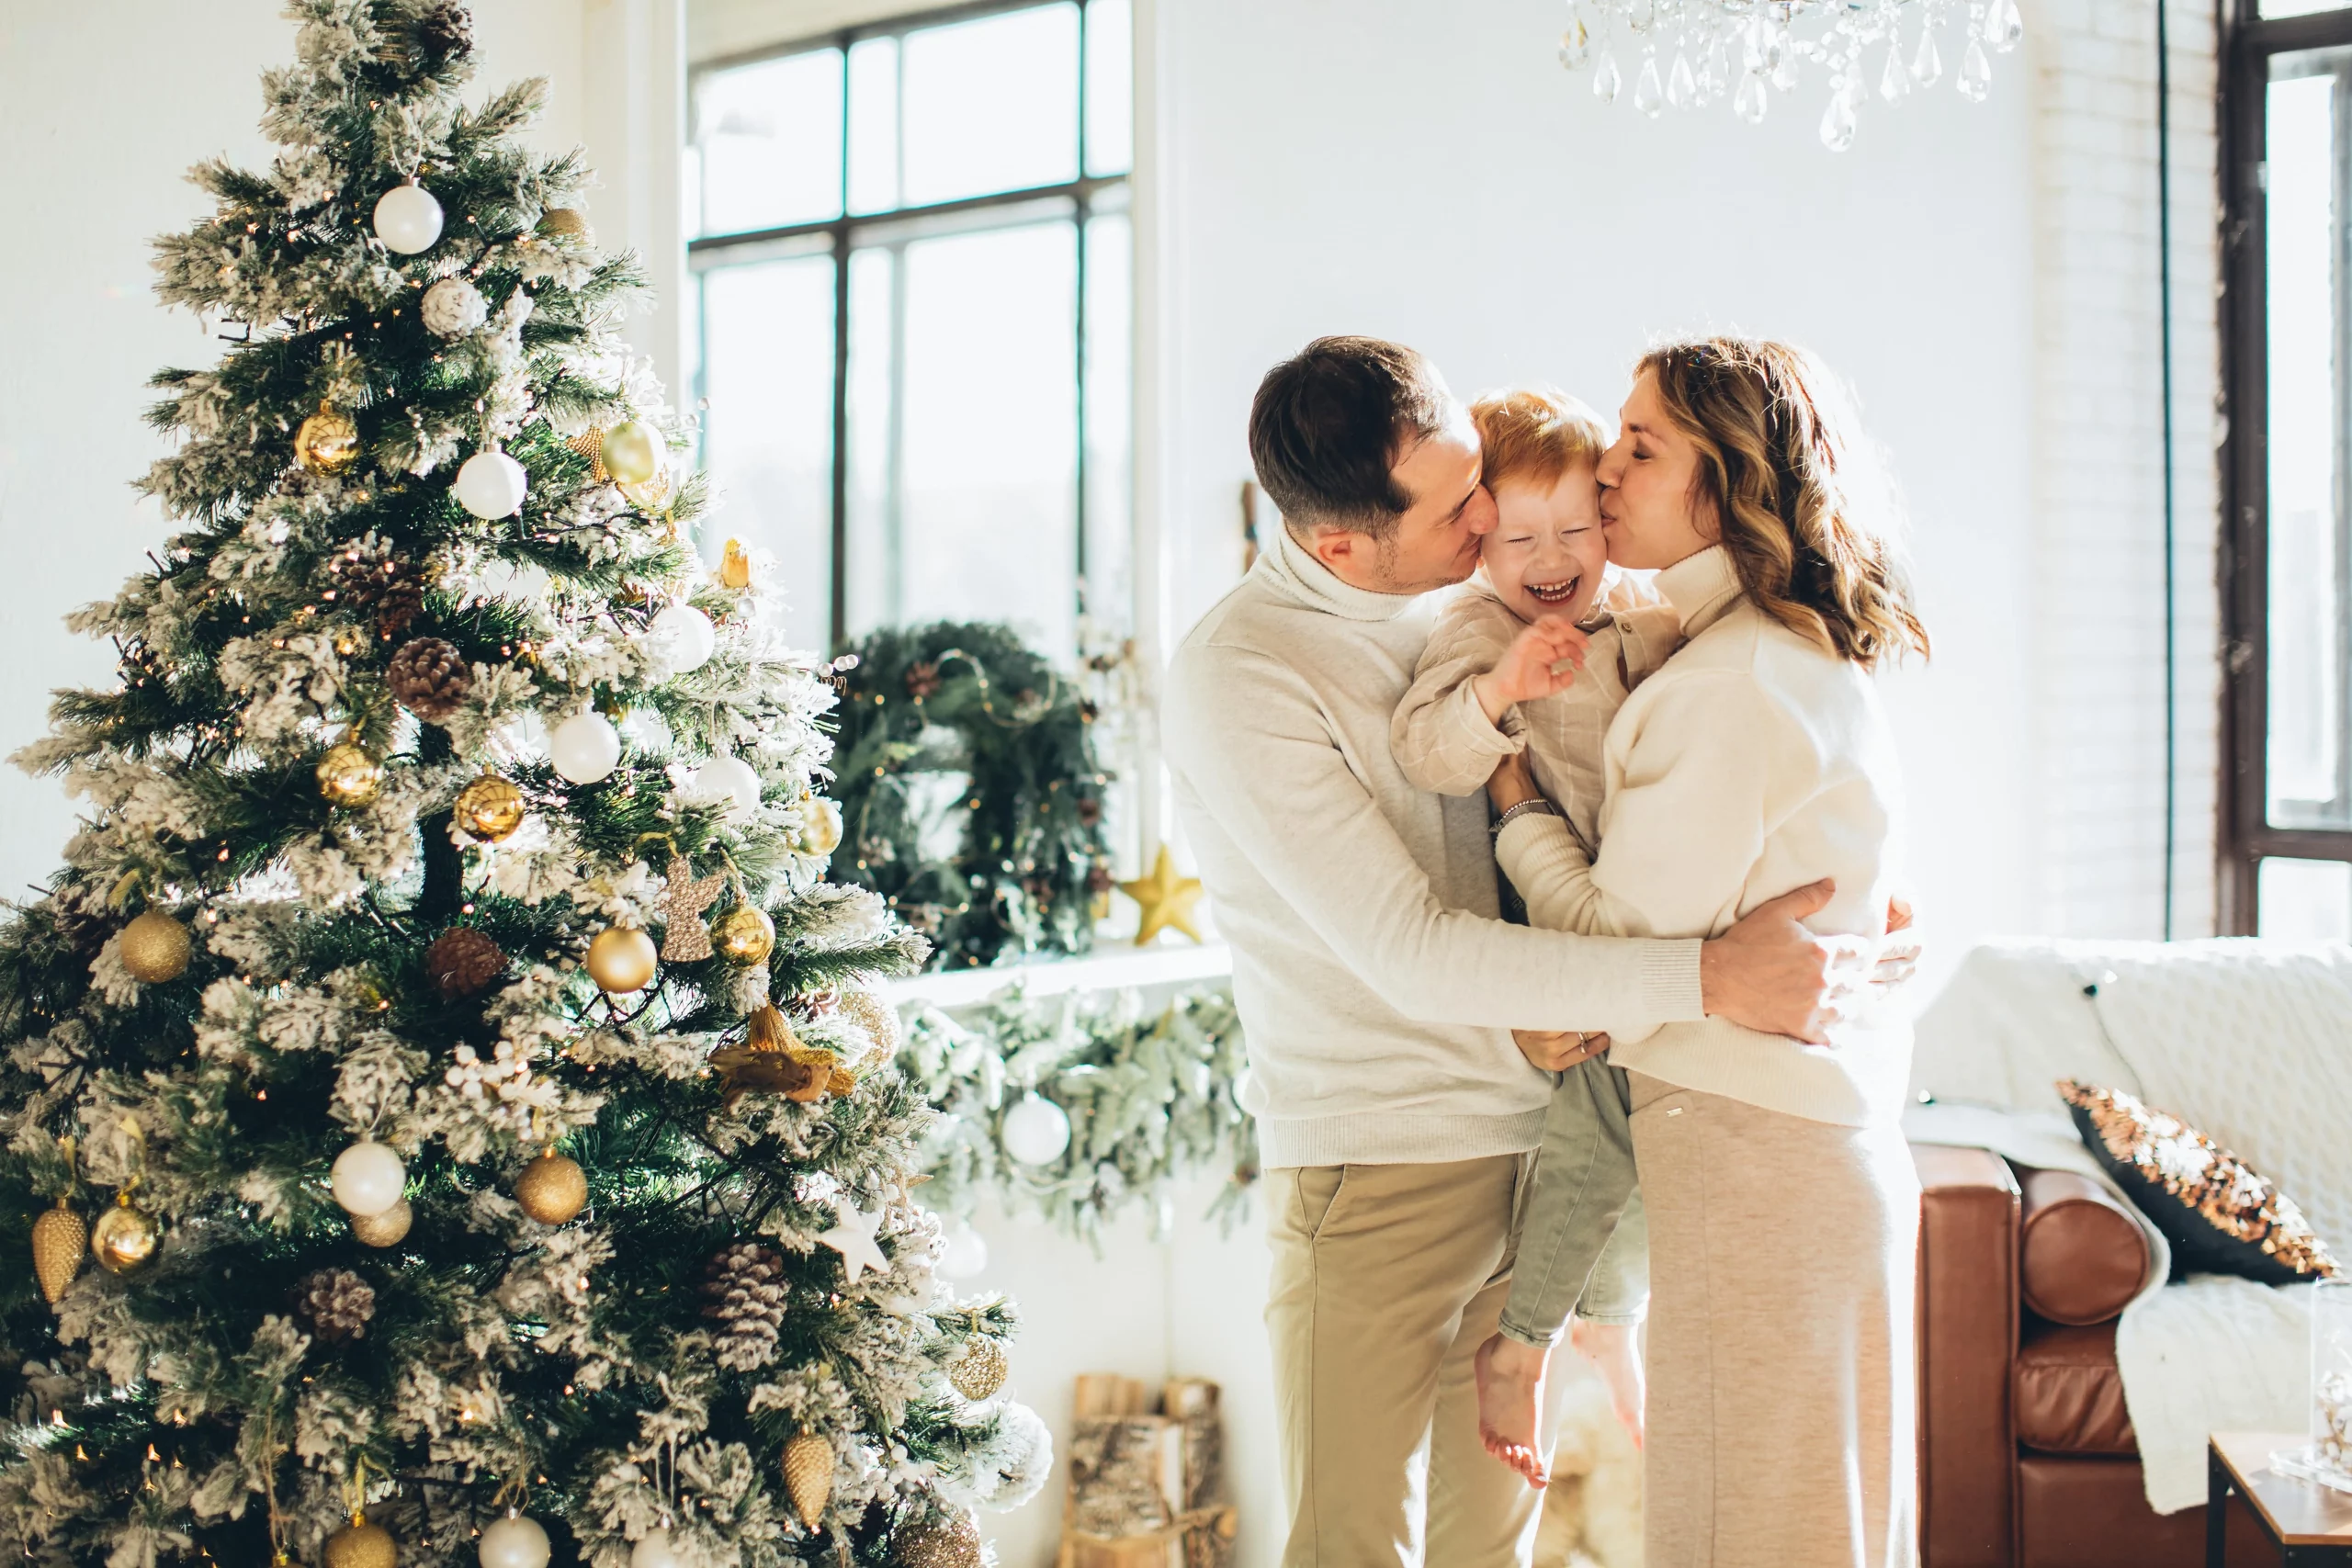 holiday stress management: love can conquer all